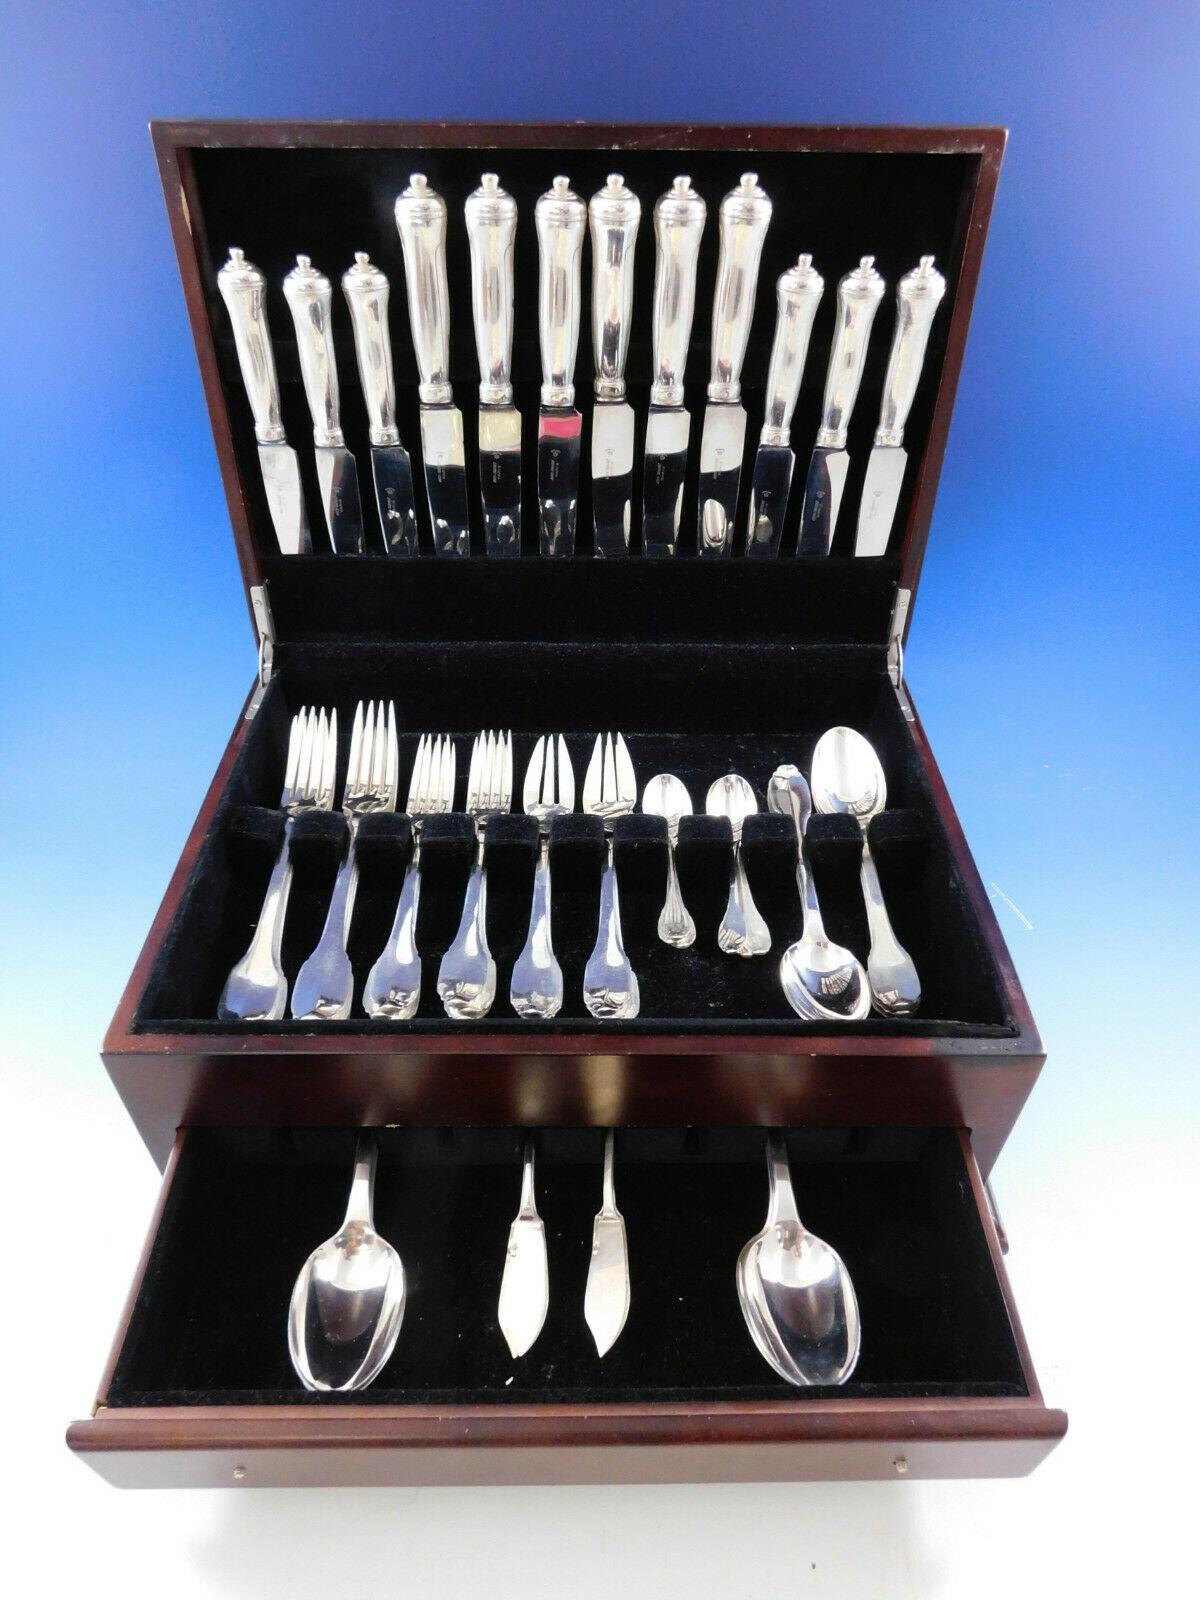 Exceptionally fine Cannon Handle Boin-Taburet, Paris, 950 silver cutlery set - 54 pieces.
This set includes:

6 large dinner knives,cannon handles,  5- 9 3/4